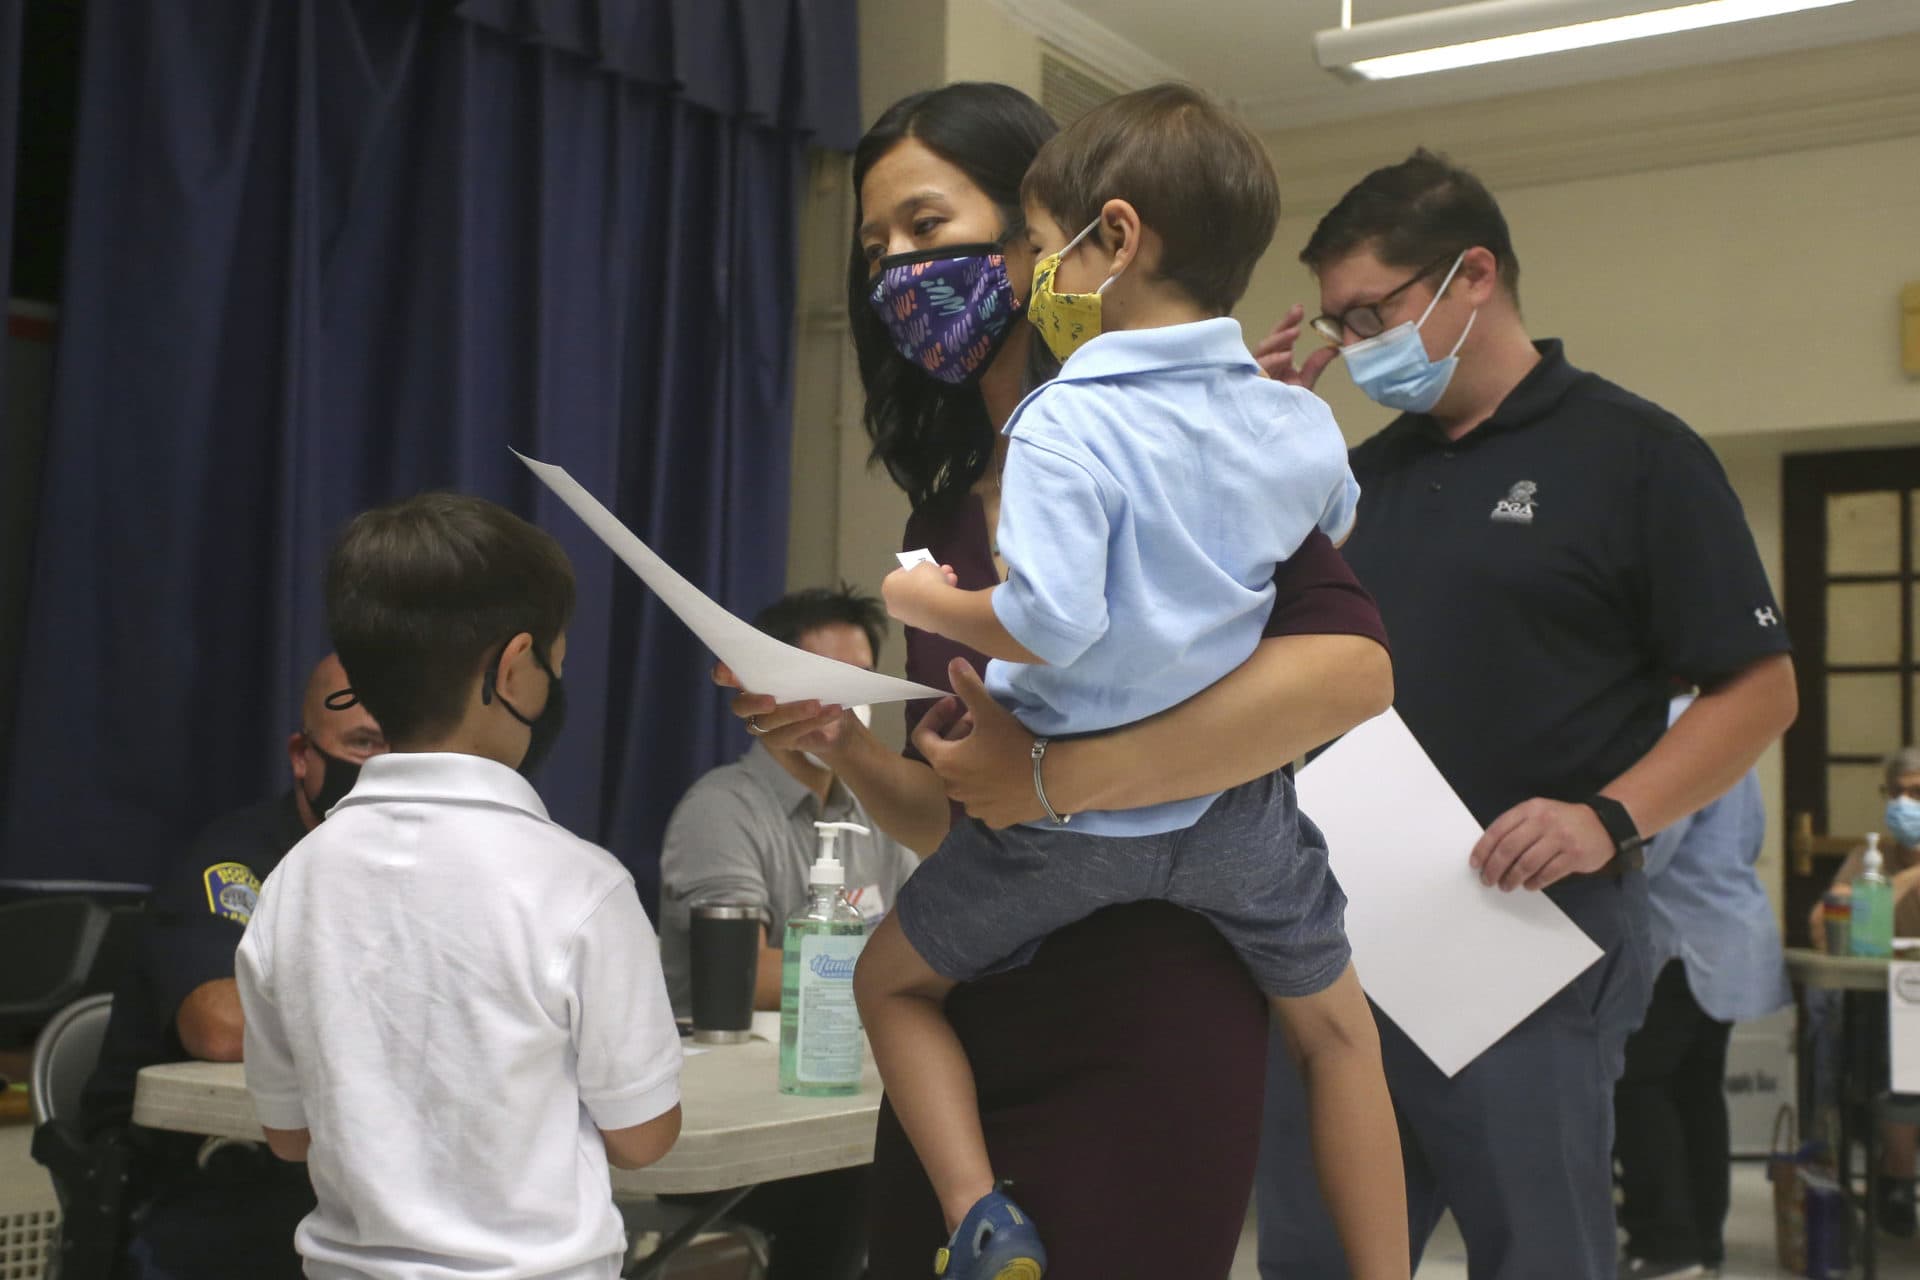 Boston mayoral candidate Michelle Wu, holding her son Cass, age 4, casts her ballot in the Mayoral race on Election Day, along with her husband Conor Pewarski, right, and their other son Blaise, left, age 6, at the Phineas Bates Elementary School in Boston, Tuesday, Sept. 14, 2021. (Stew Milne/AP)